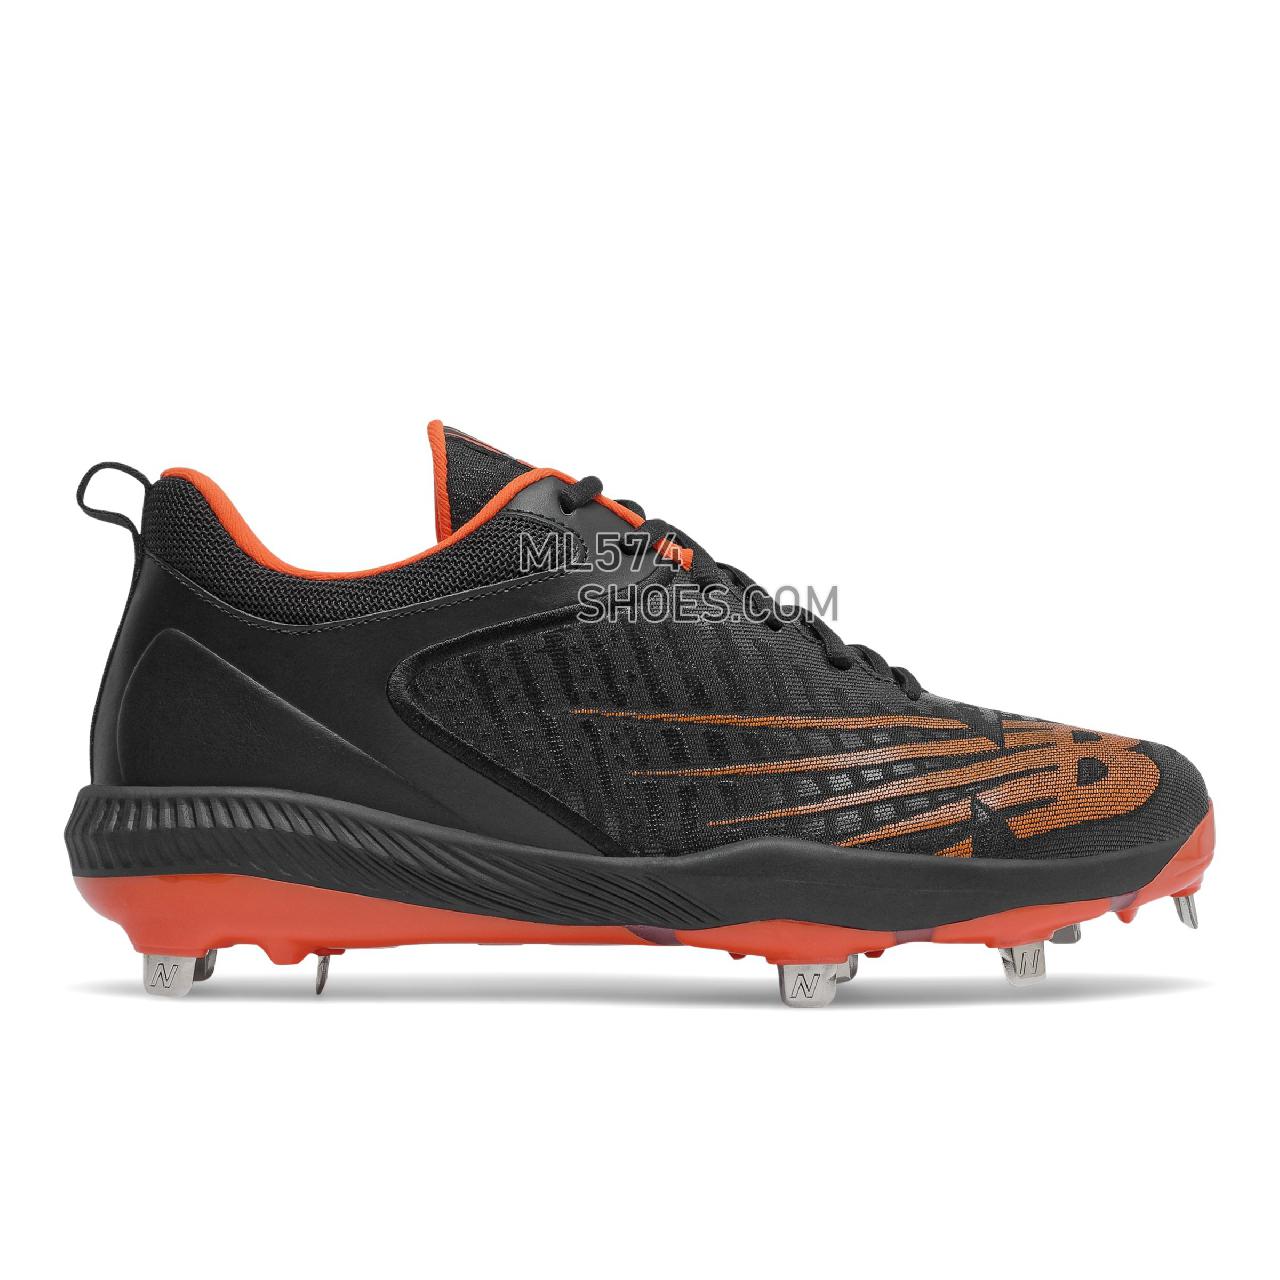 New Balance FuelCell 4040 v6 Metal - Men's Mid-Cut Baseball Cleats - Black with Orange - L4040BO6